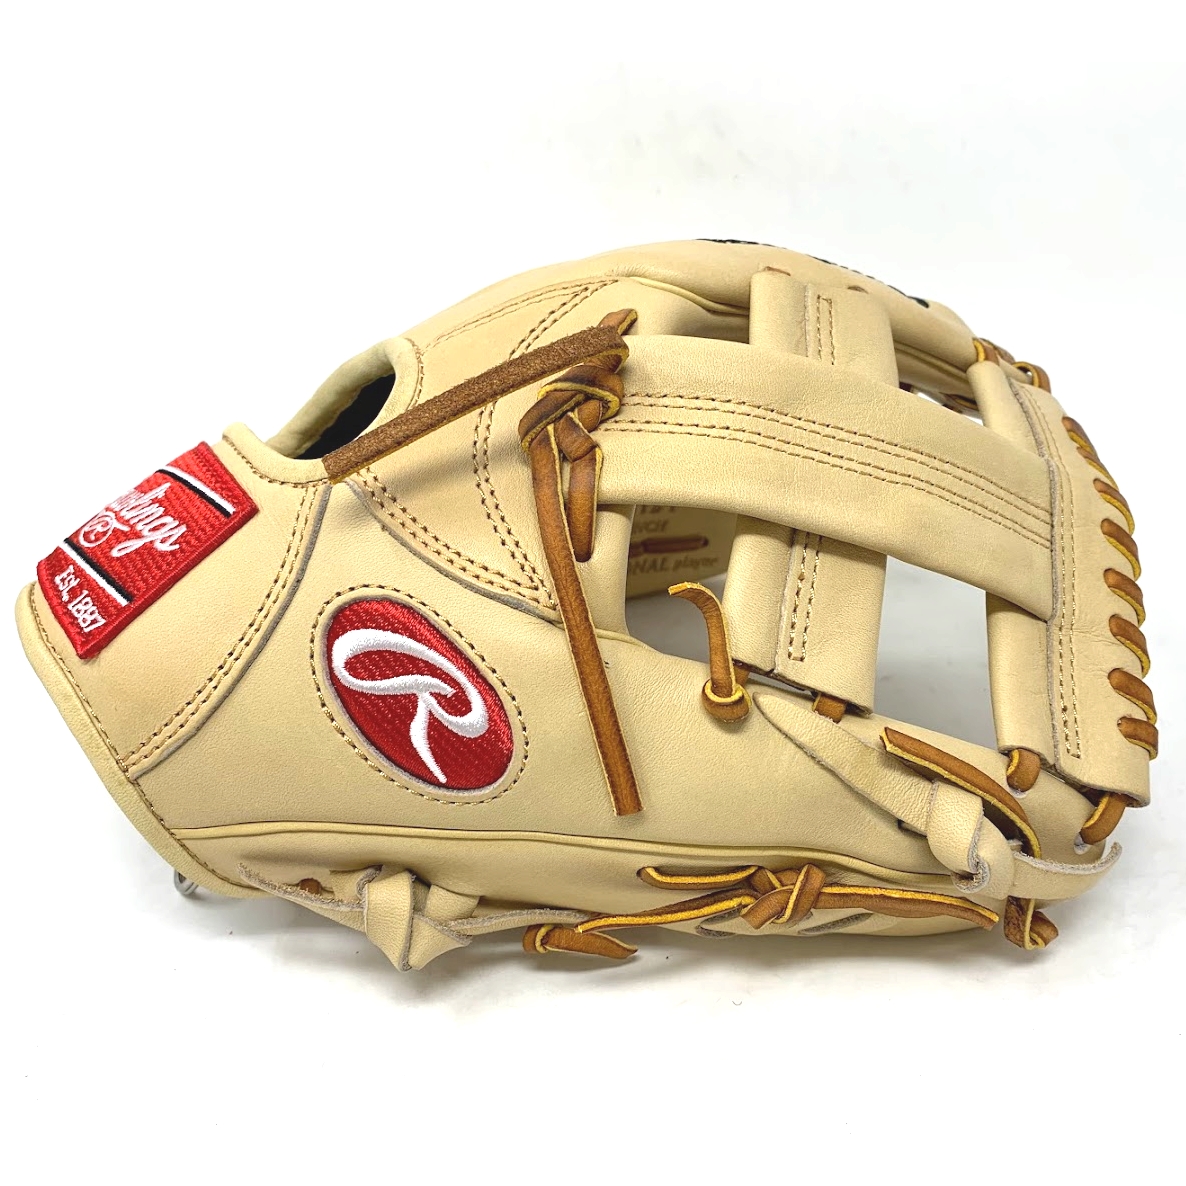 rawlings-heart-of-the-hide-pro-tt2-baseball-glove-11-5-camel-tan-laces-right-hand-throw PROTT2-CTAN-RightHandThrow Rawlings  <p>Take the field with this limited make Rawlings Heart of the